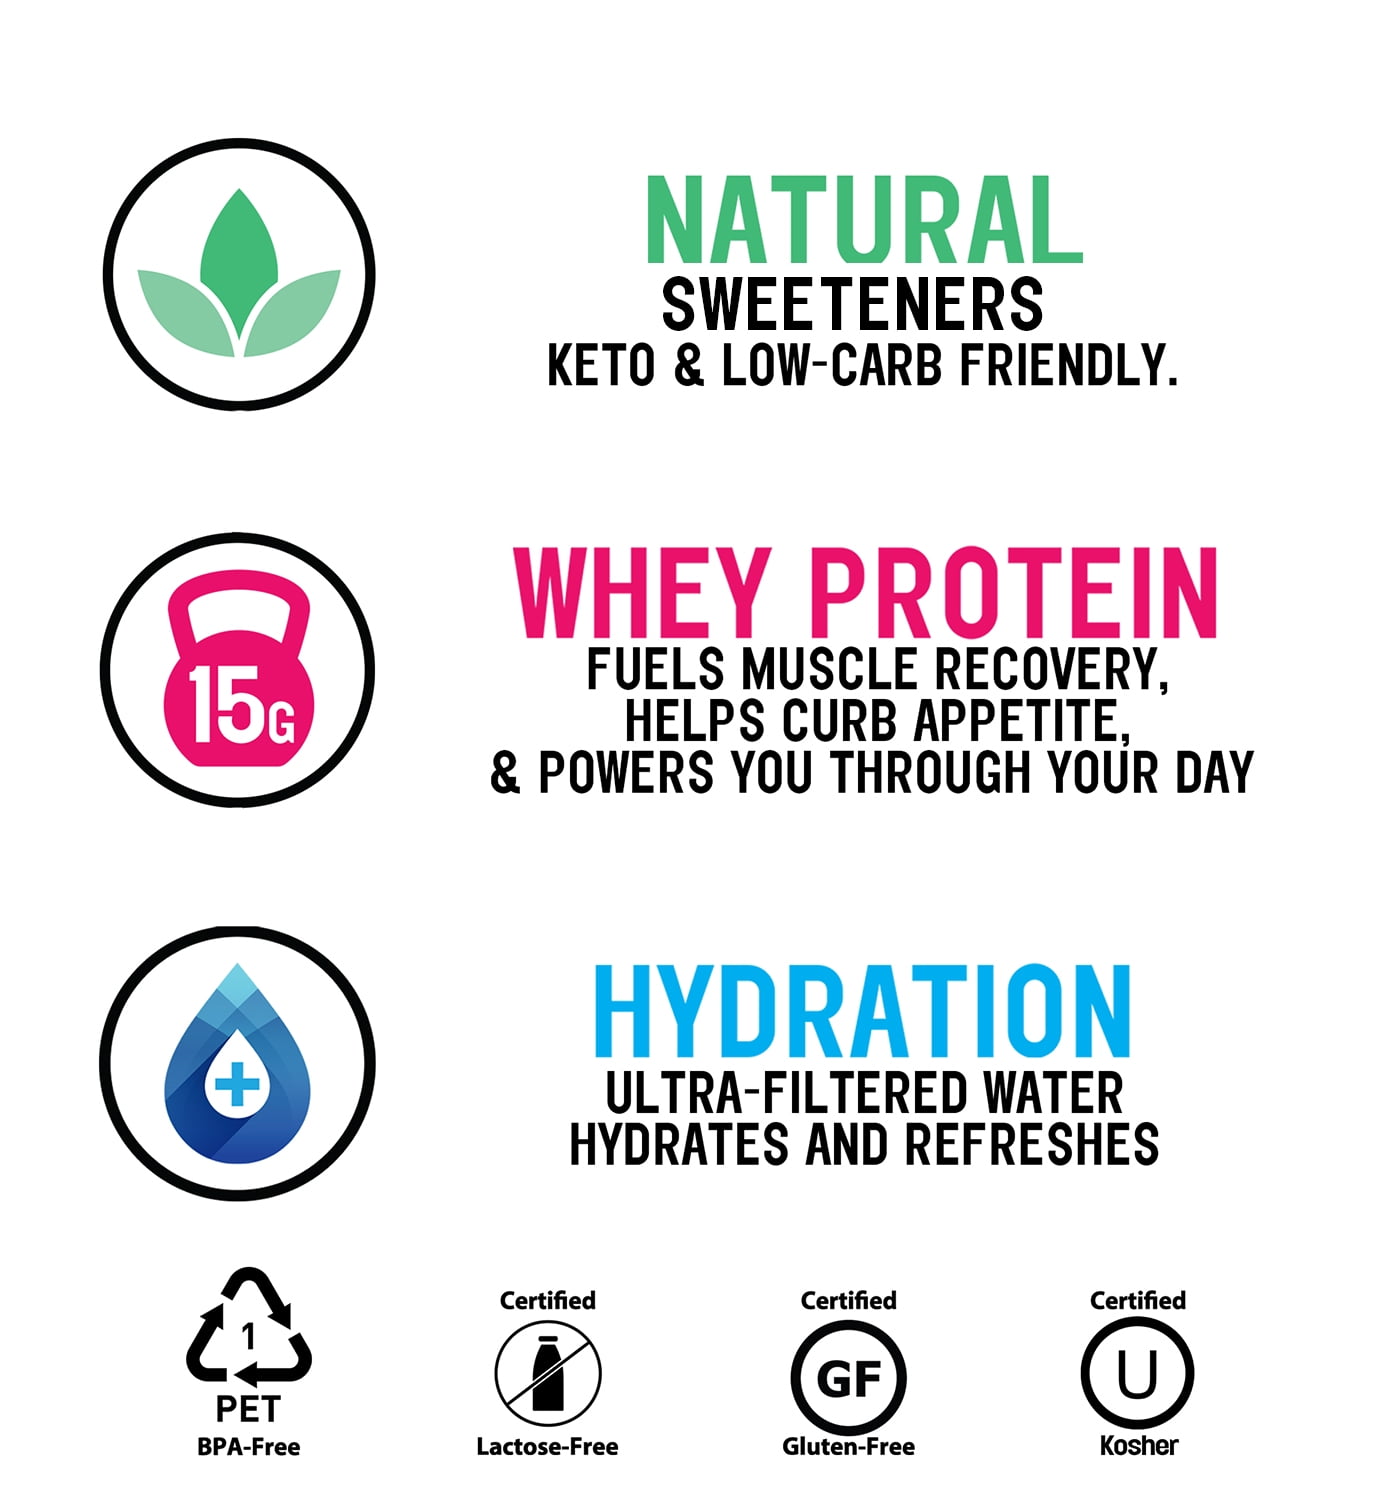 Protein2o 15g Whey Protein Infused Water, Wild Cherry, 16.9 oz Bottle (Pack  of 12) 